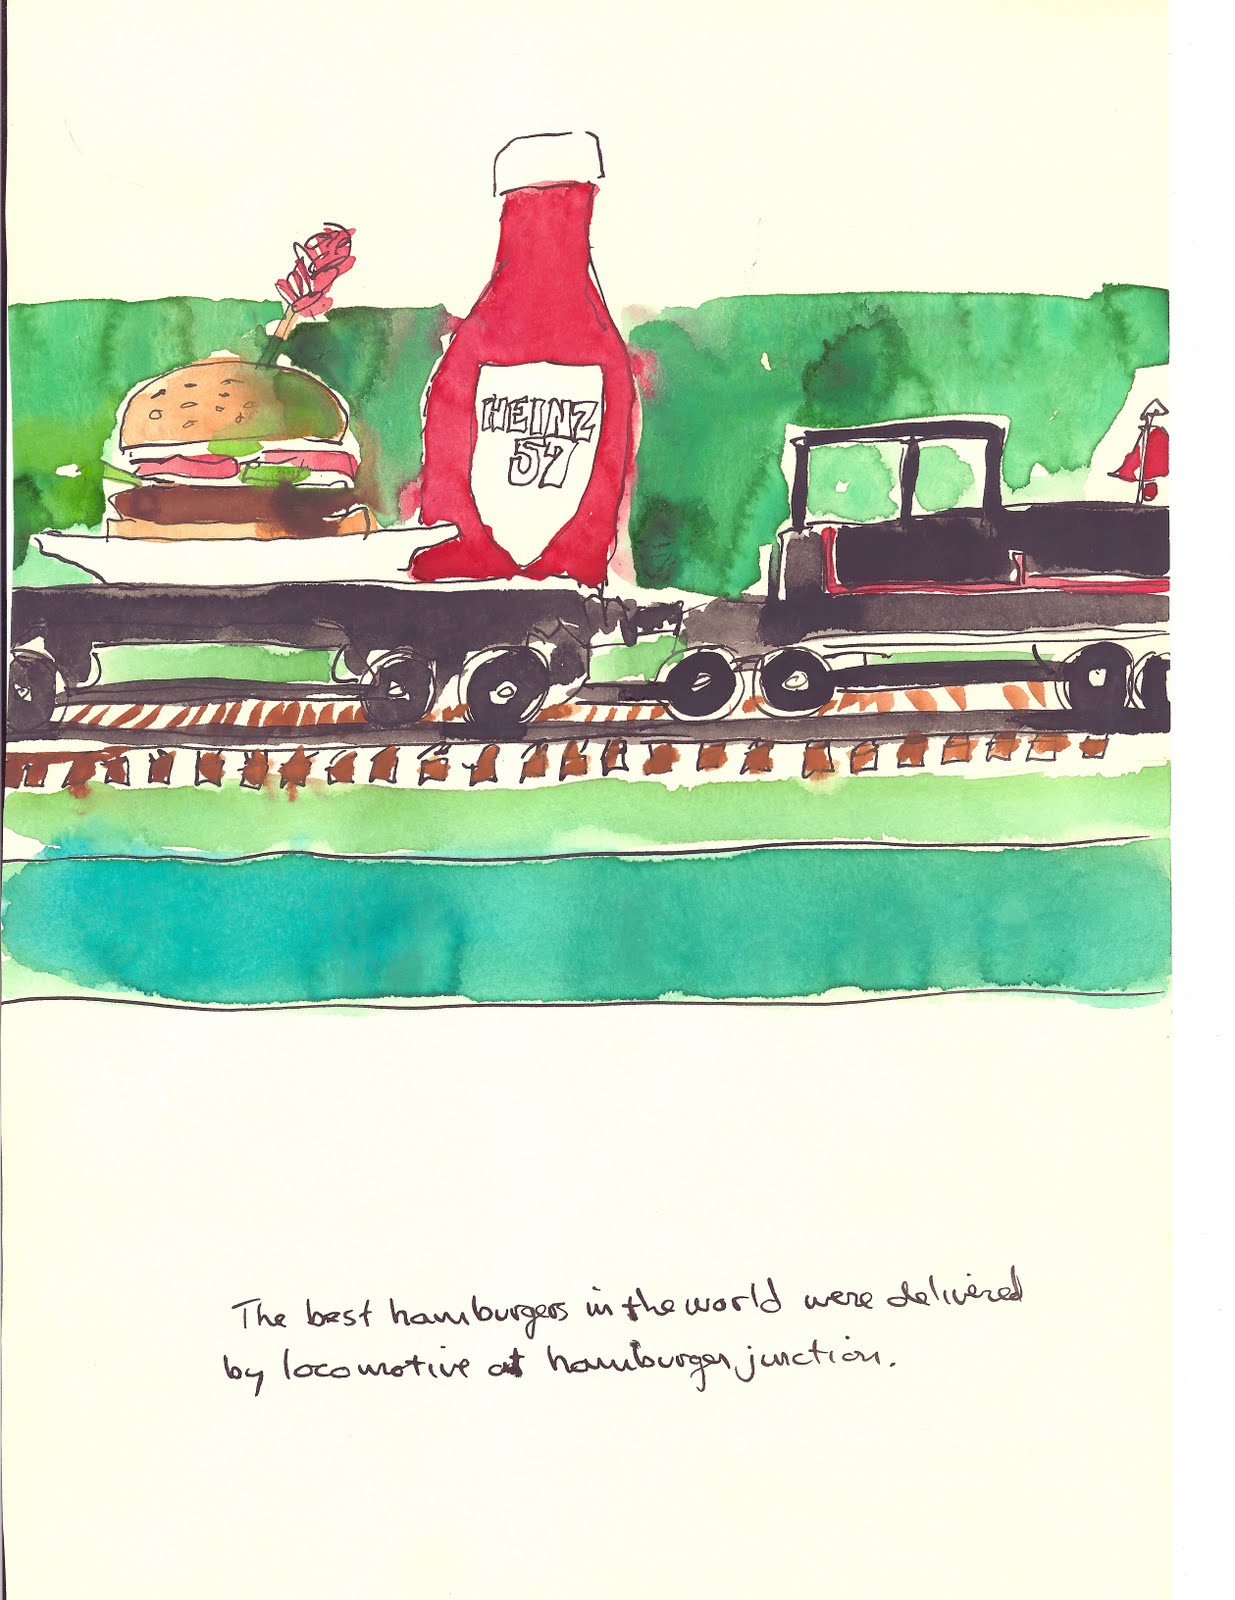 Drawn by Kirby Vining for TM Vining for his 72 birthday in 1986, Hamburger Junction was in Carney, MD